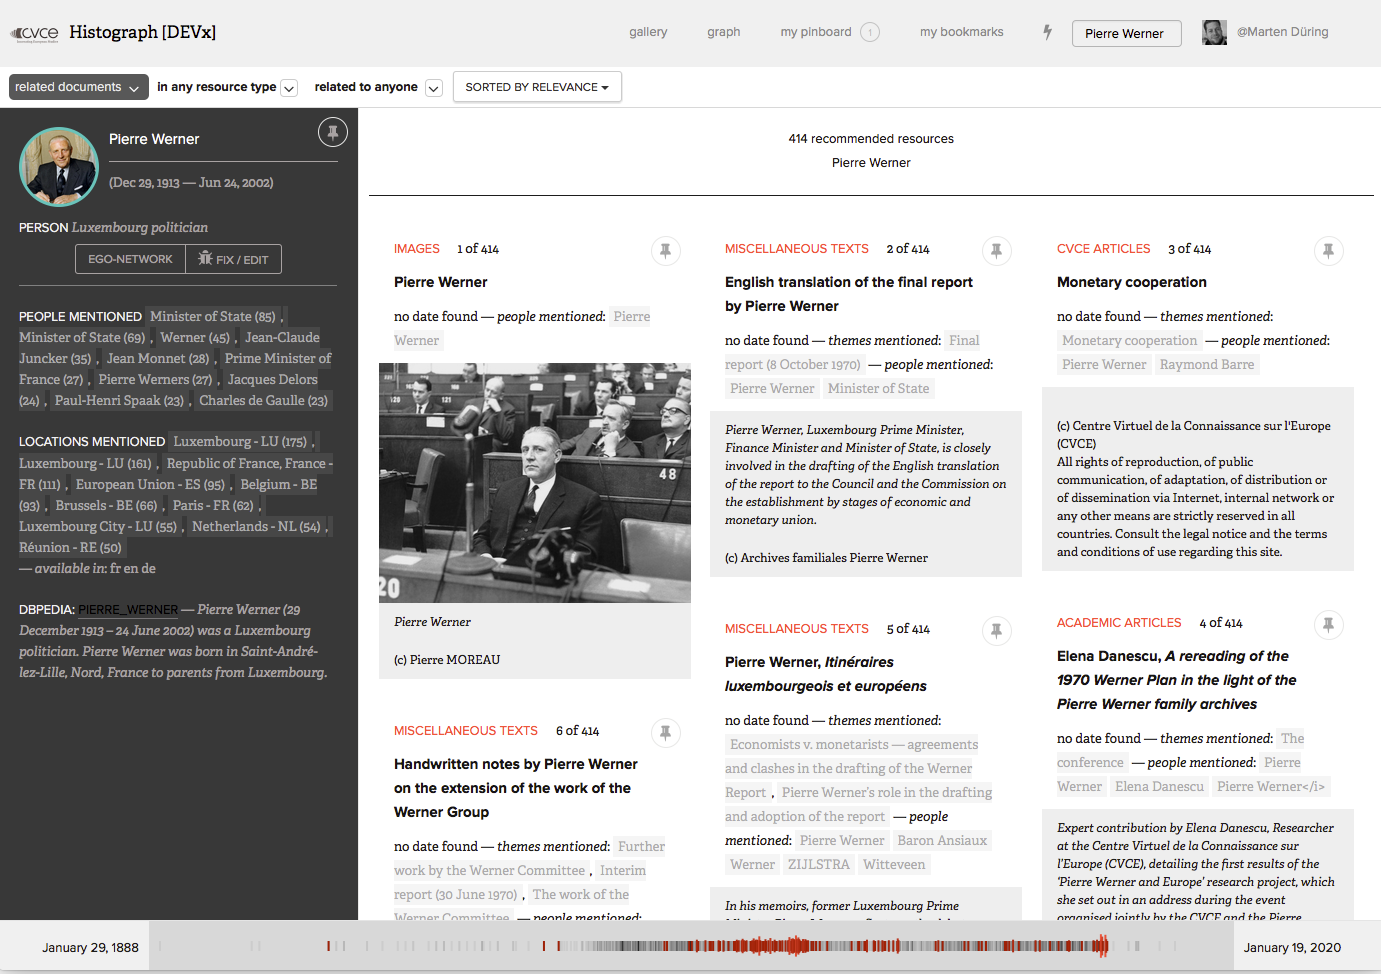 Figure 2: A search for „Pierre Werner“ reveals a short biographical overview with a list of frequently co-occurring entities (left column) and a gallery view of related documents which can be filtered e.g. by resource type and time